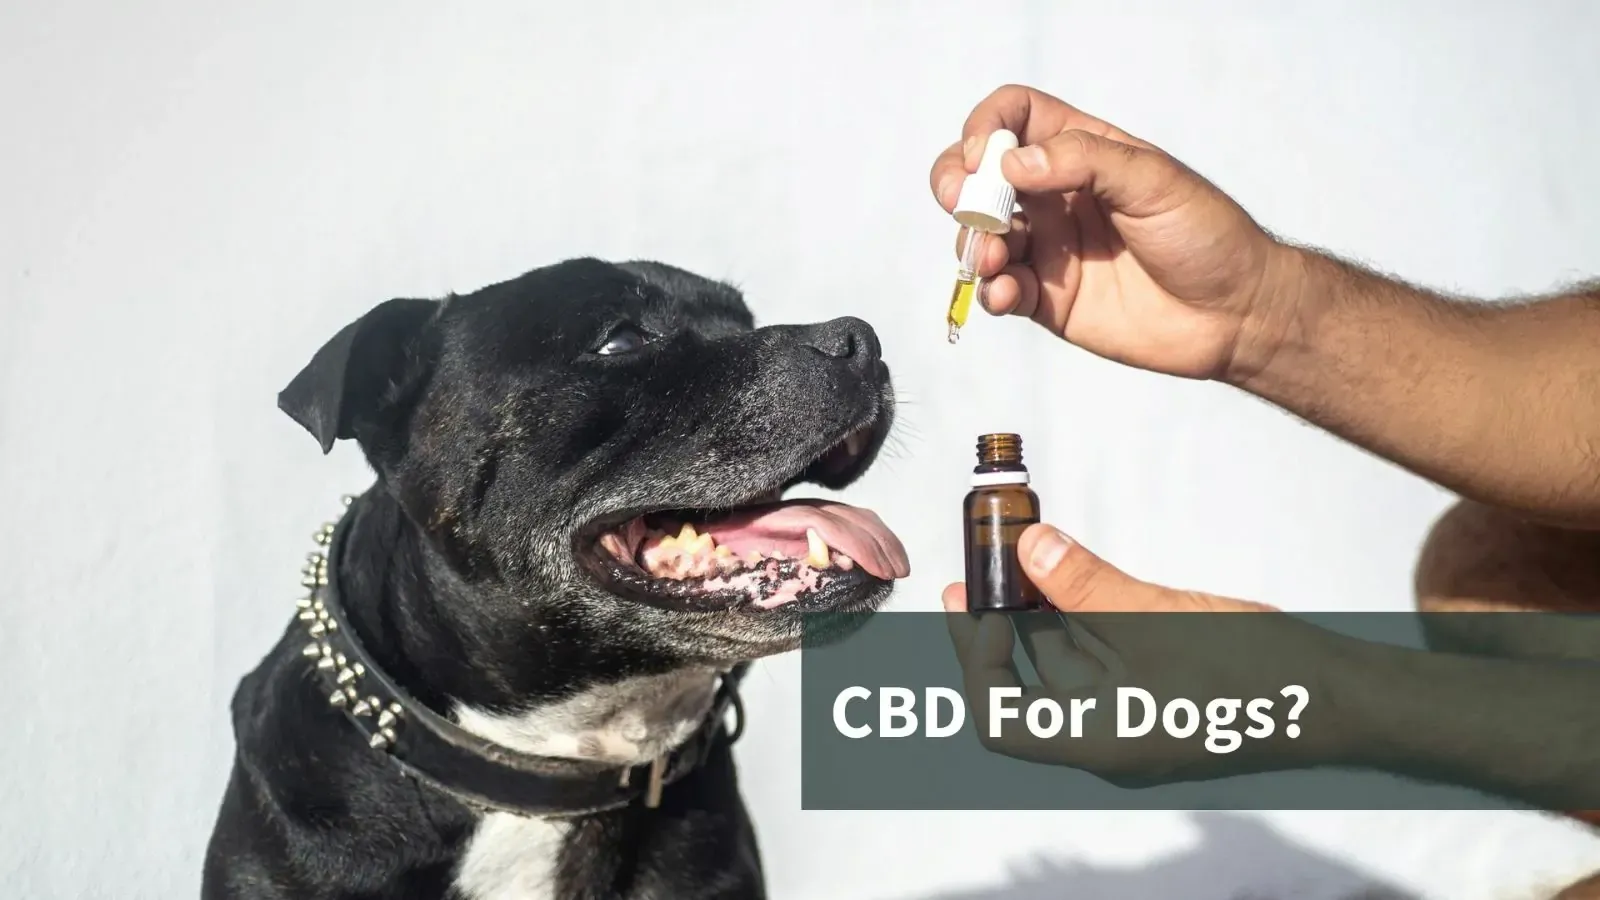 Giving a dog CBD oil. Text reads "CBD for Dogs?"